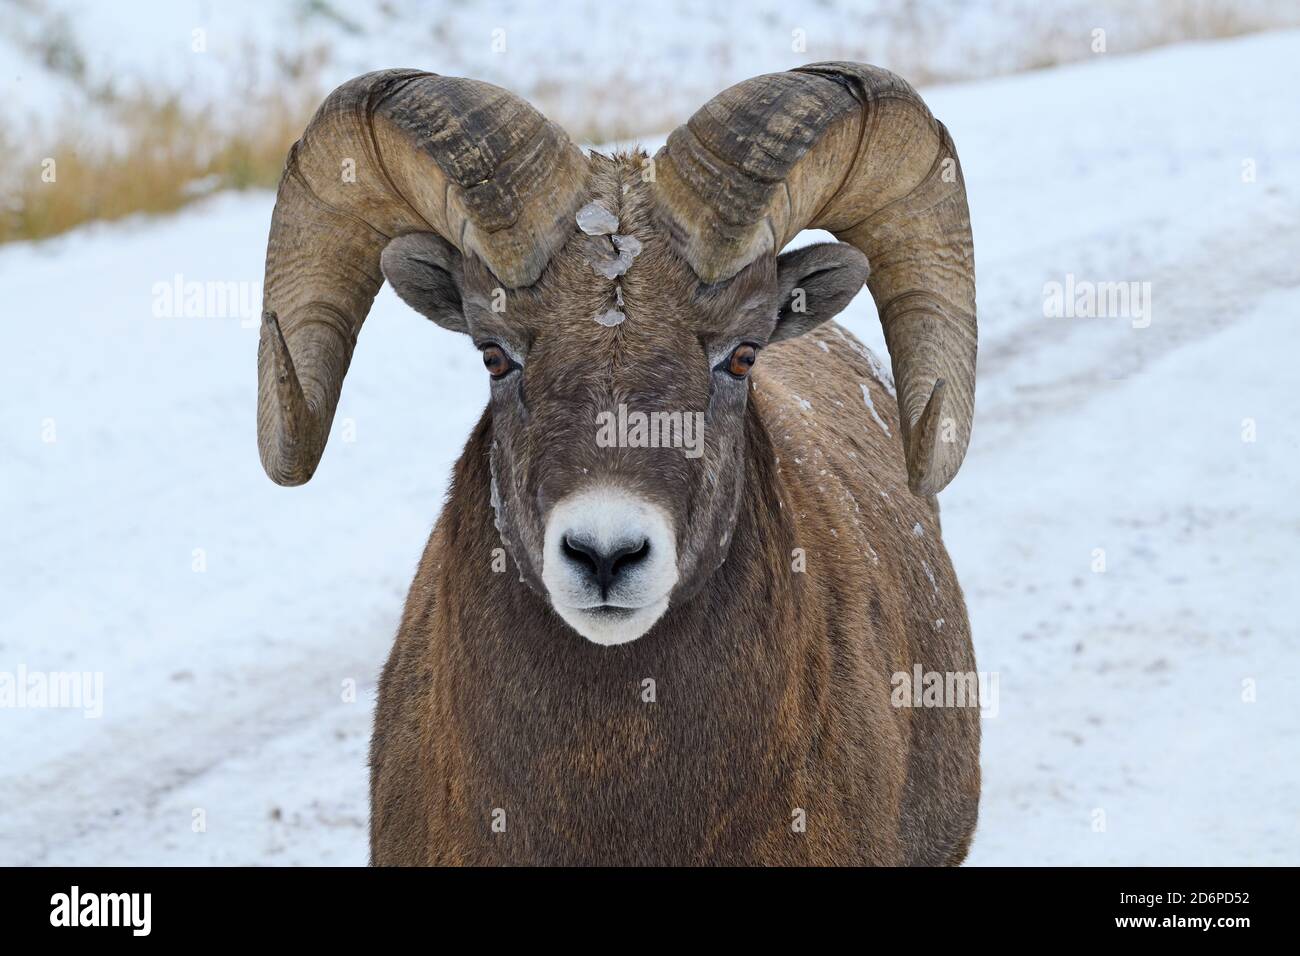 A close up portrait image of a rocky mountain Bighorn Sheep 'Orvis canadensis', walking on a rural road in the foothills of the rocky mountains in Alb Stock Photo